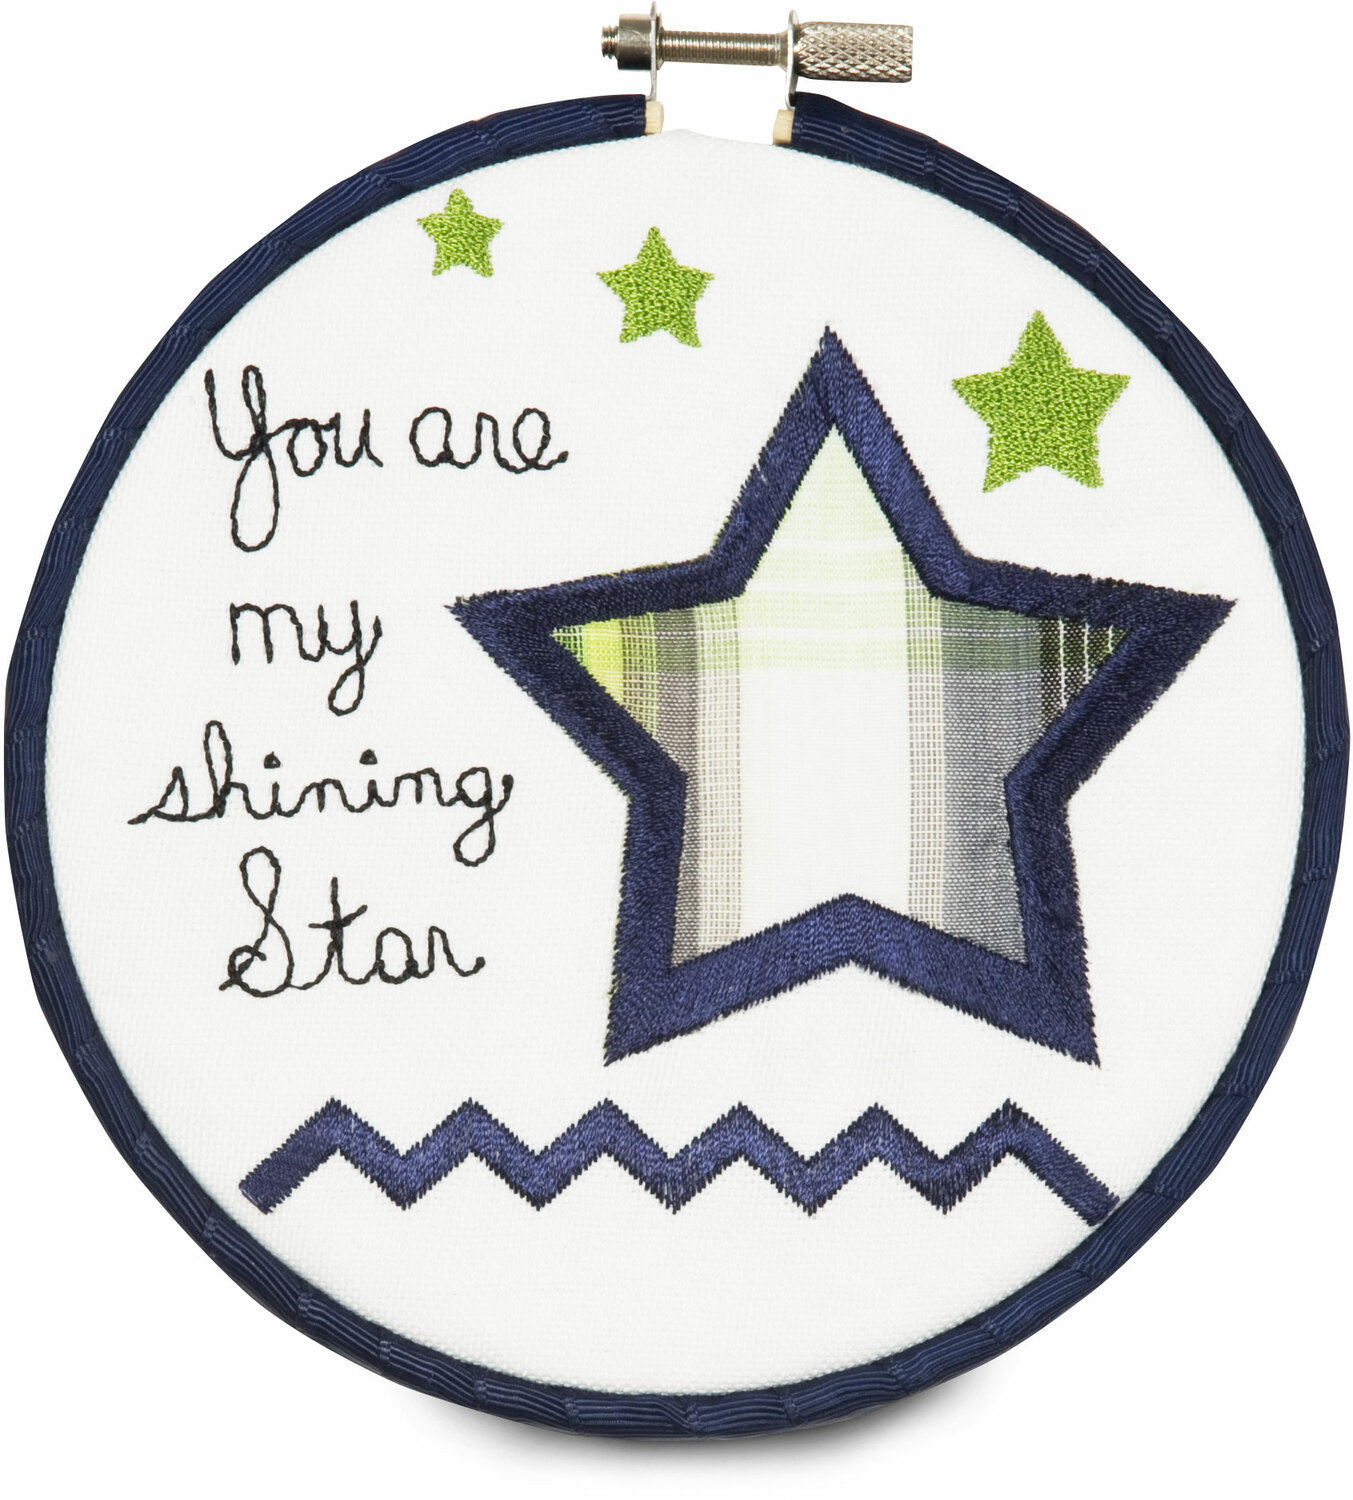 Grasshopper by Itty Bitty & Pretty - Grasshopper - You are my shining star 5.5" Wall Covering